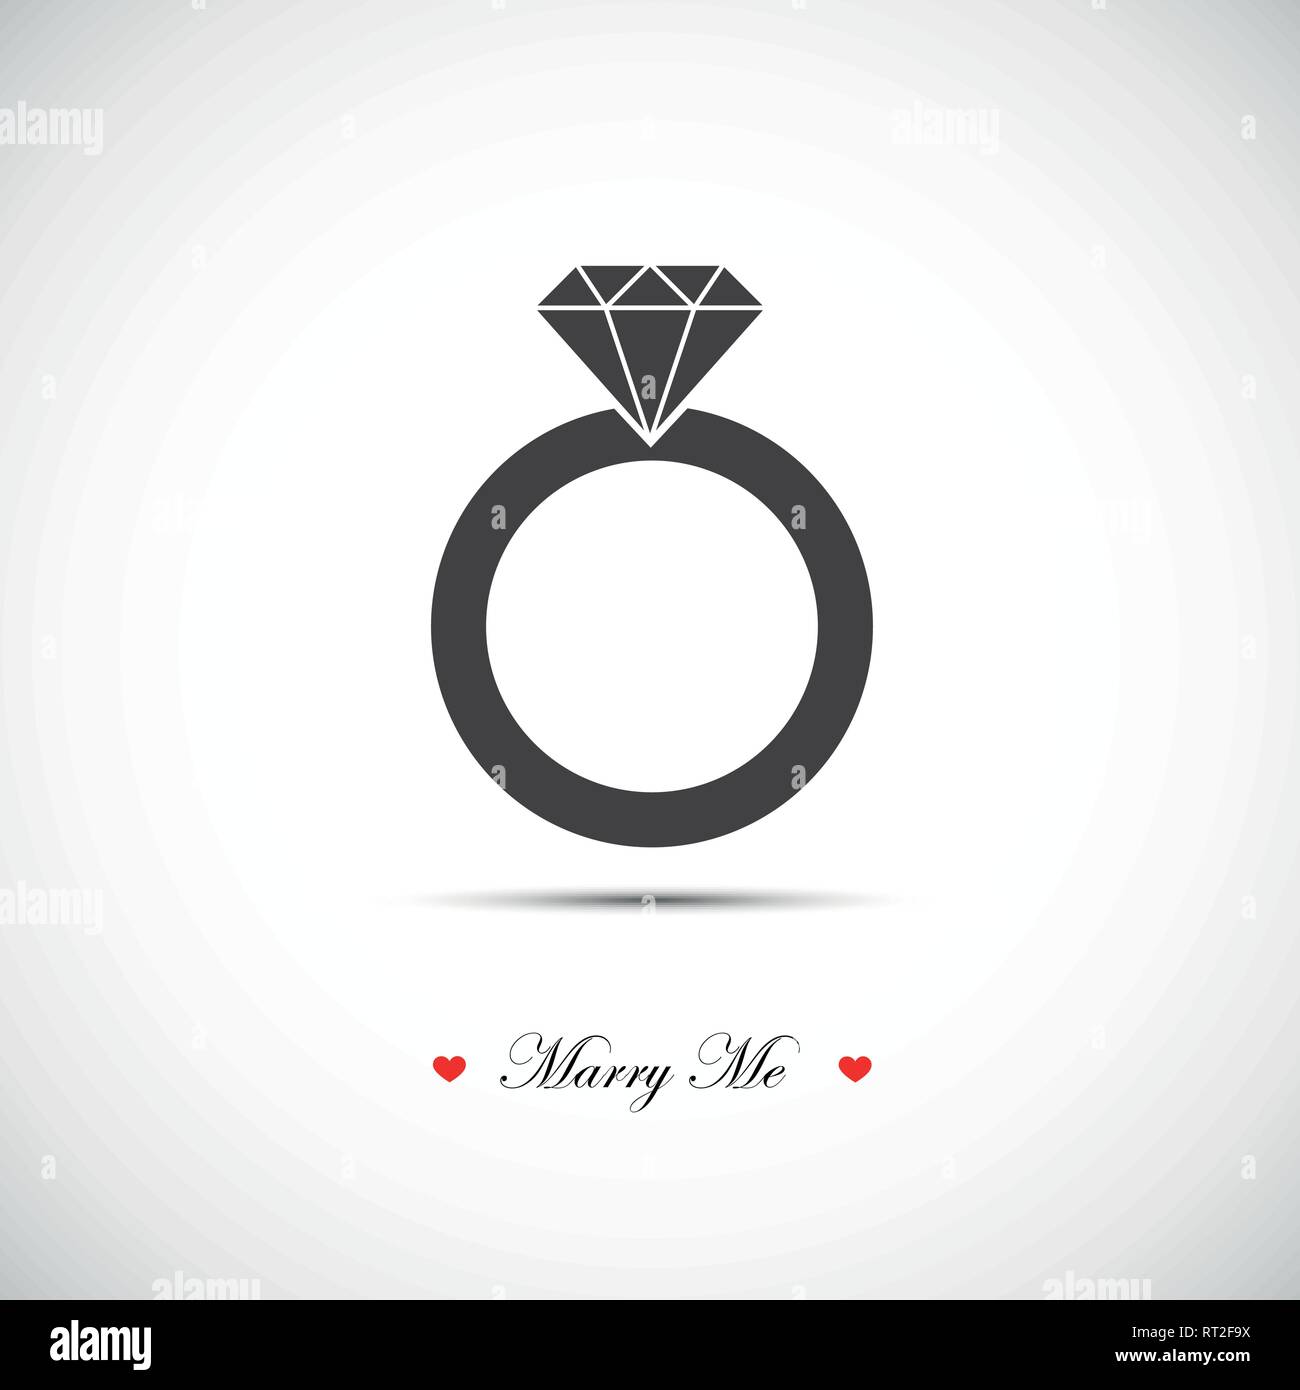 marry me wedding ring icon pictogram vector illustration EPS10 Stock Vector